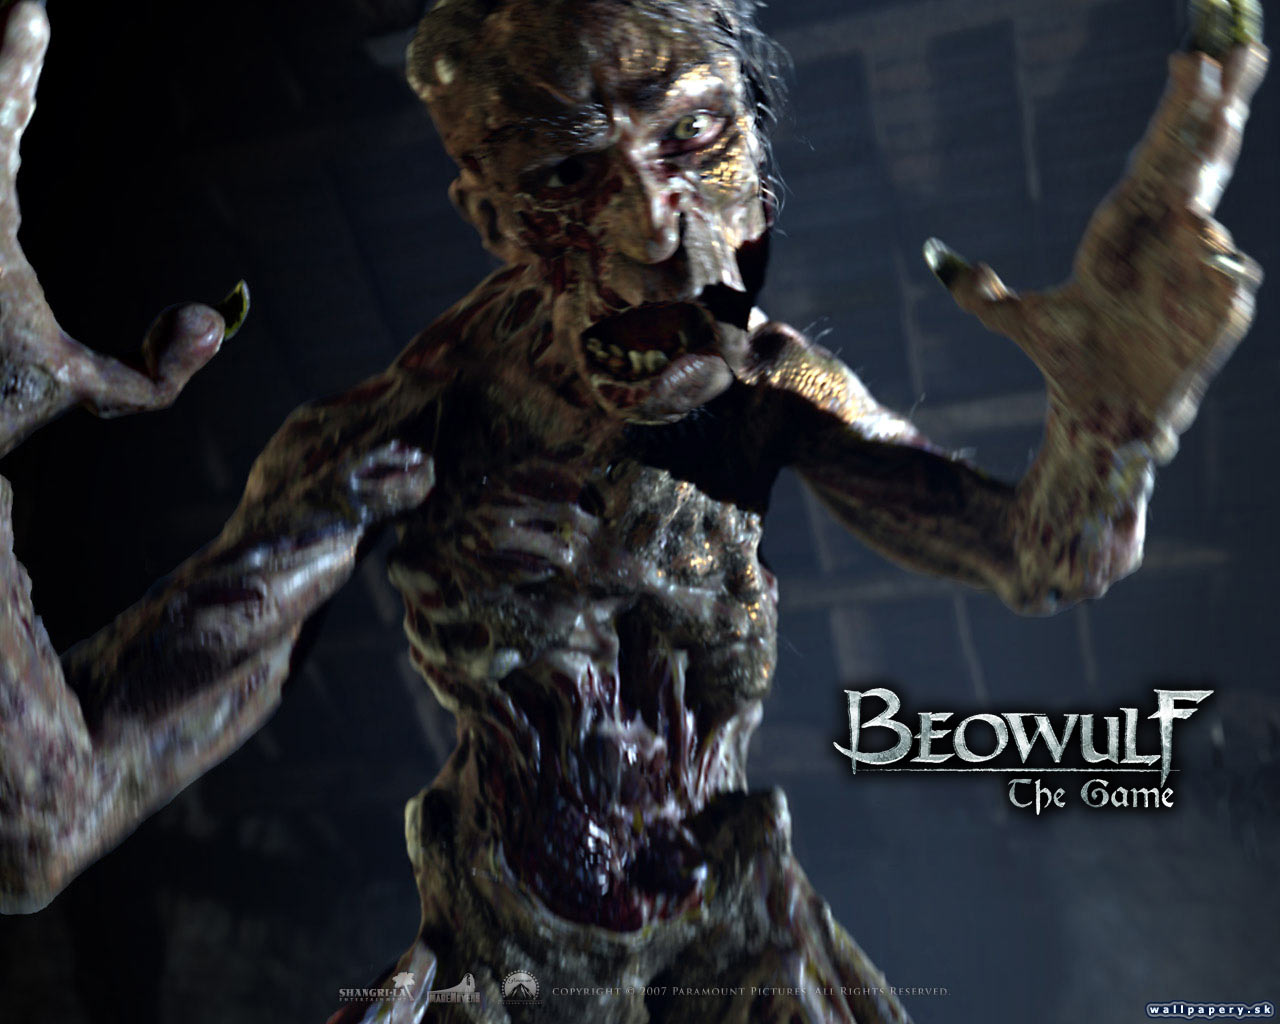 Beowulf: The Game - wallpaper 10